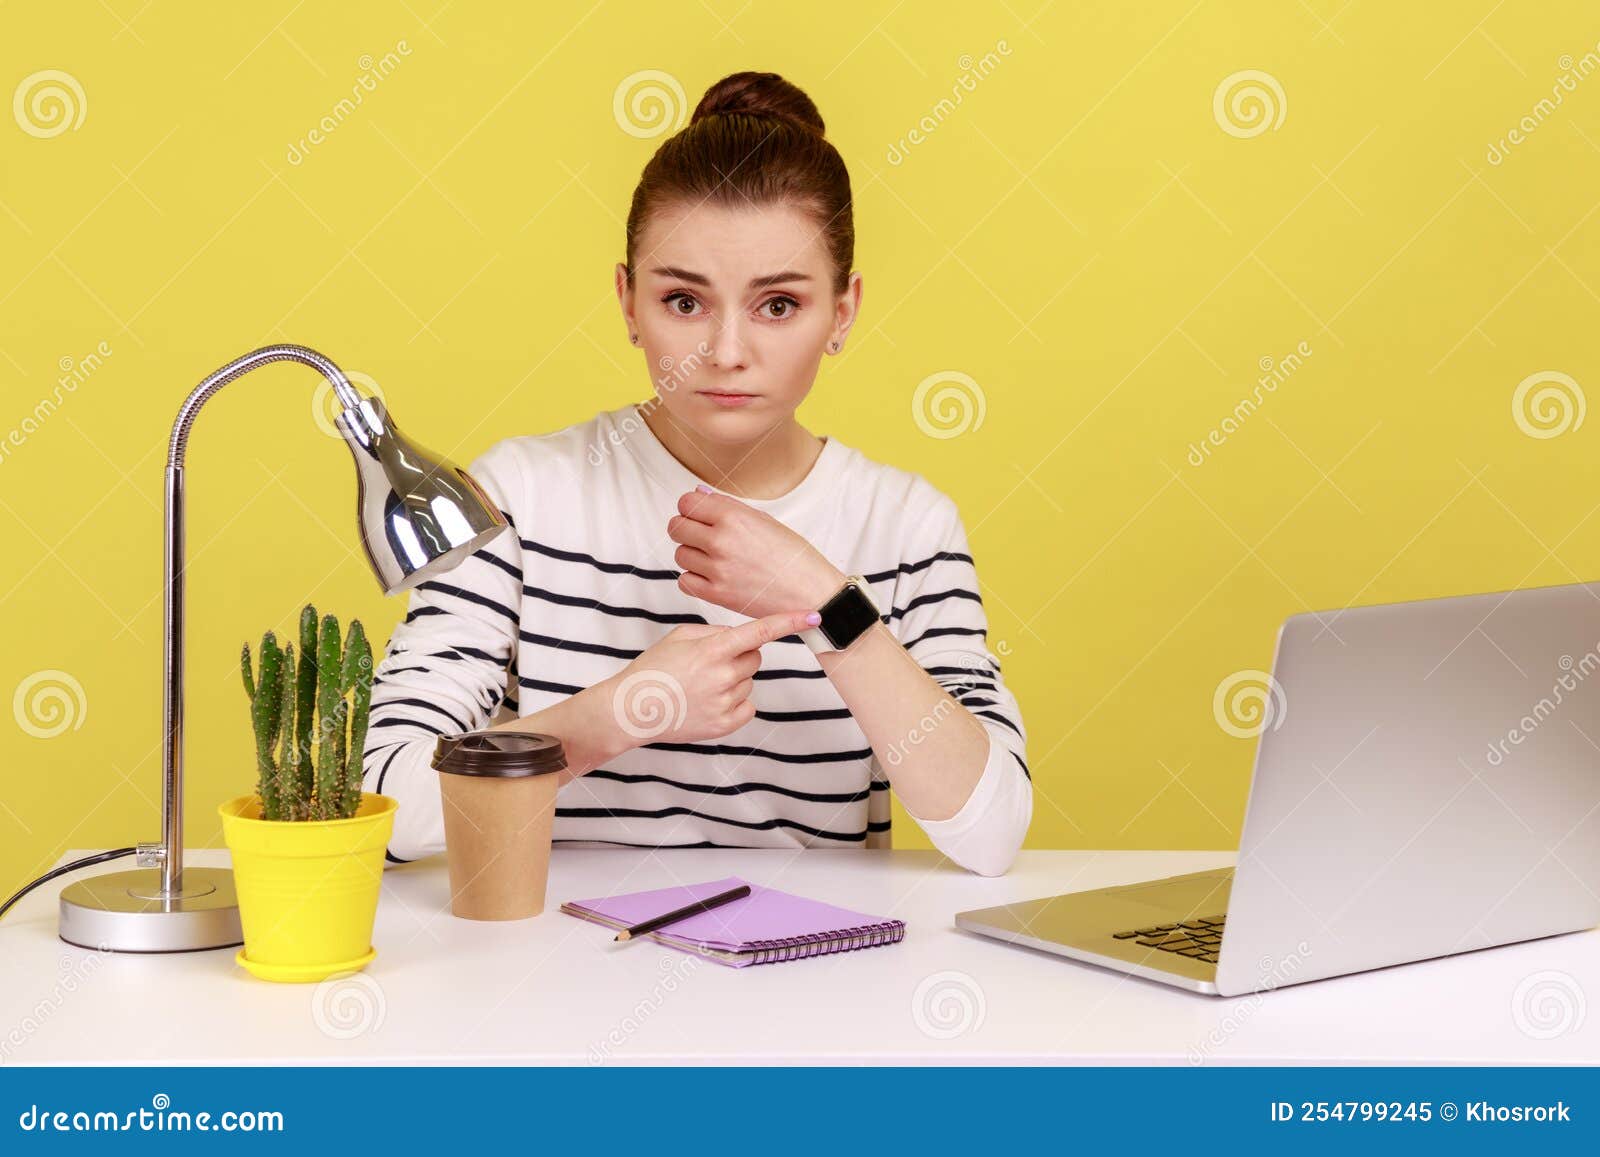 Woman Employee Sitting in Office and Pointing To Watch on Her Hand ...